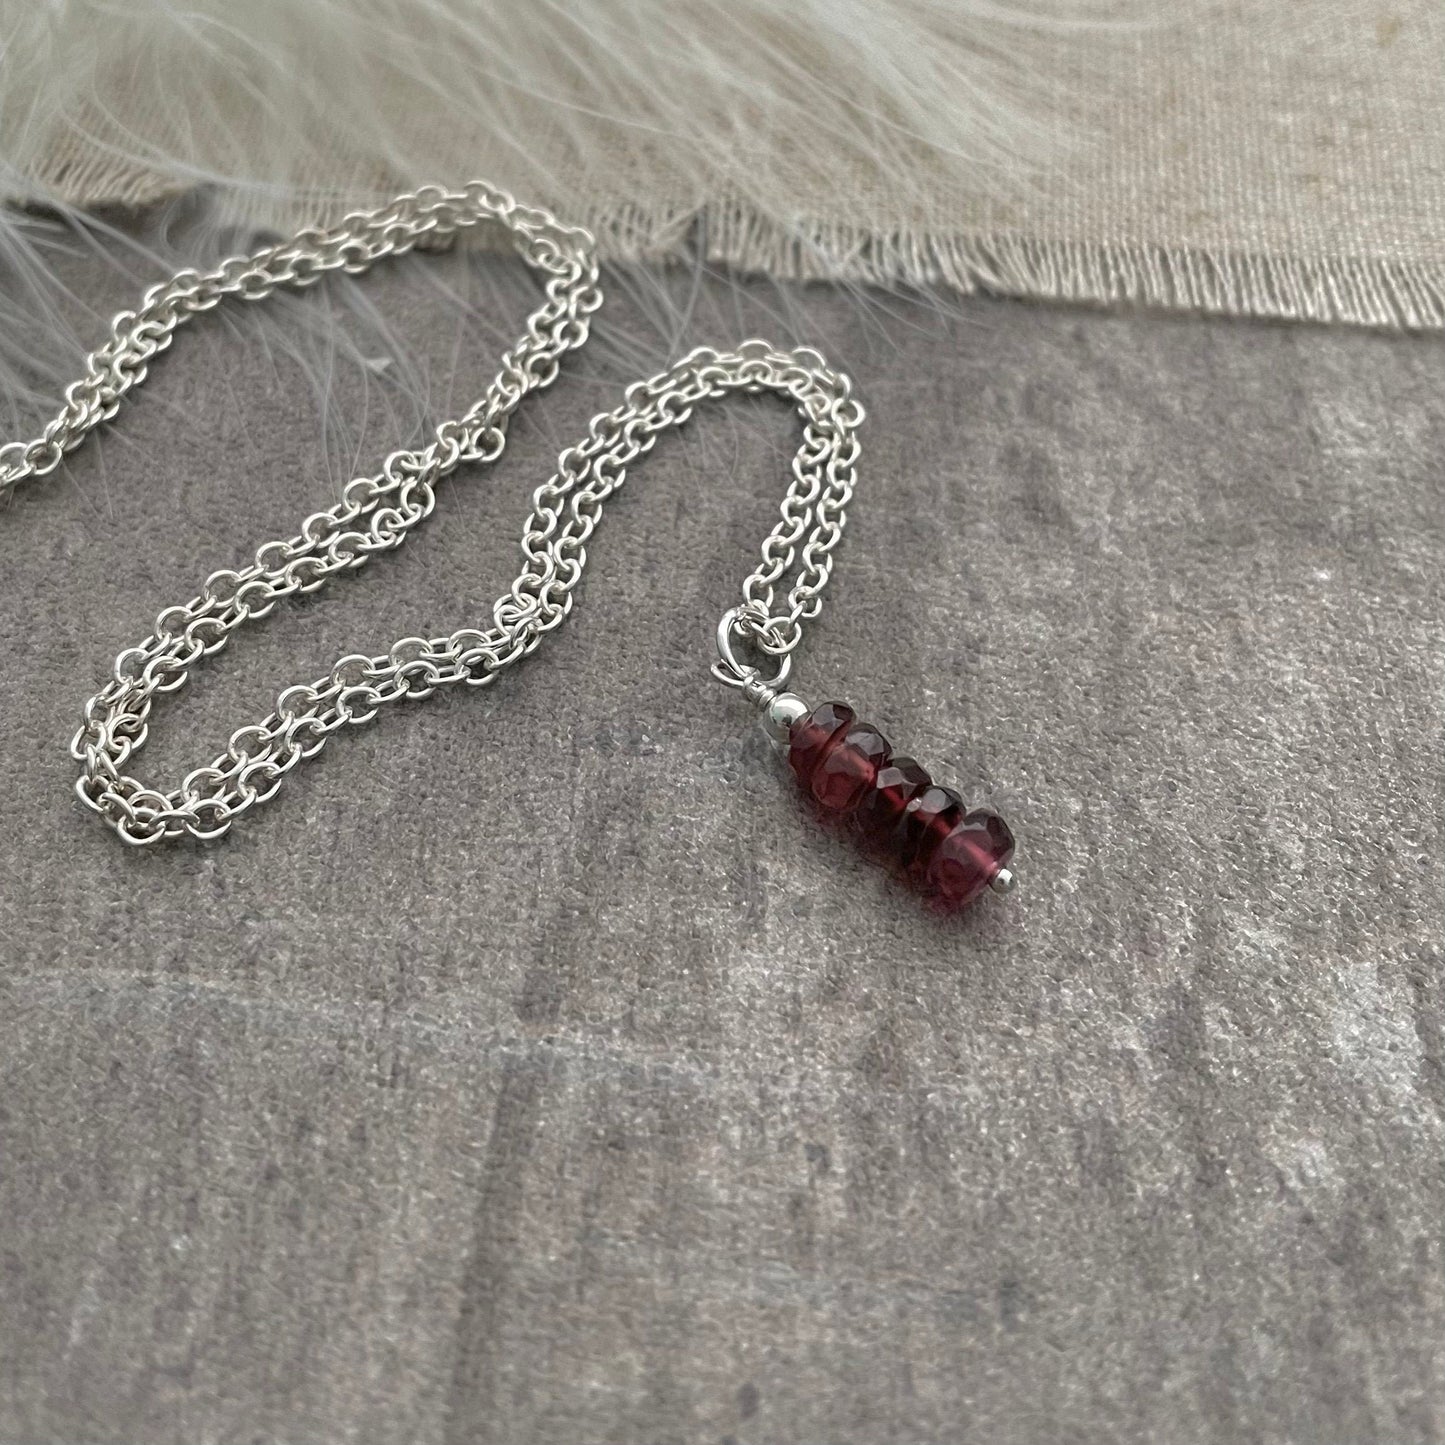 Dainty Garnet necklace, January birthstone, sterling silver faceted pendant gemstone necklace